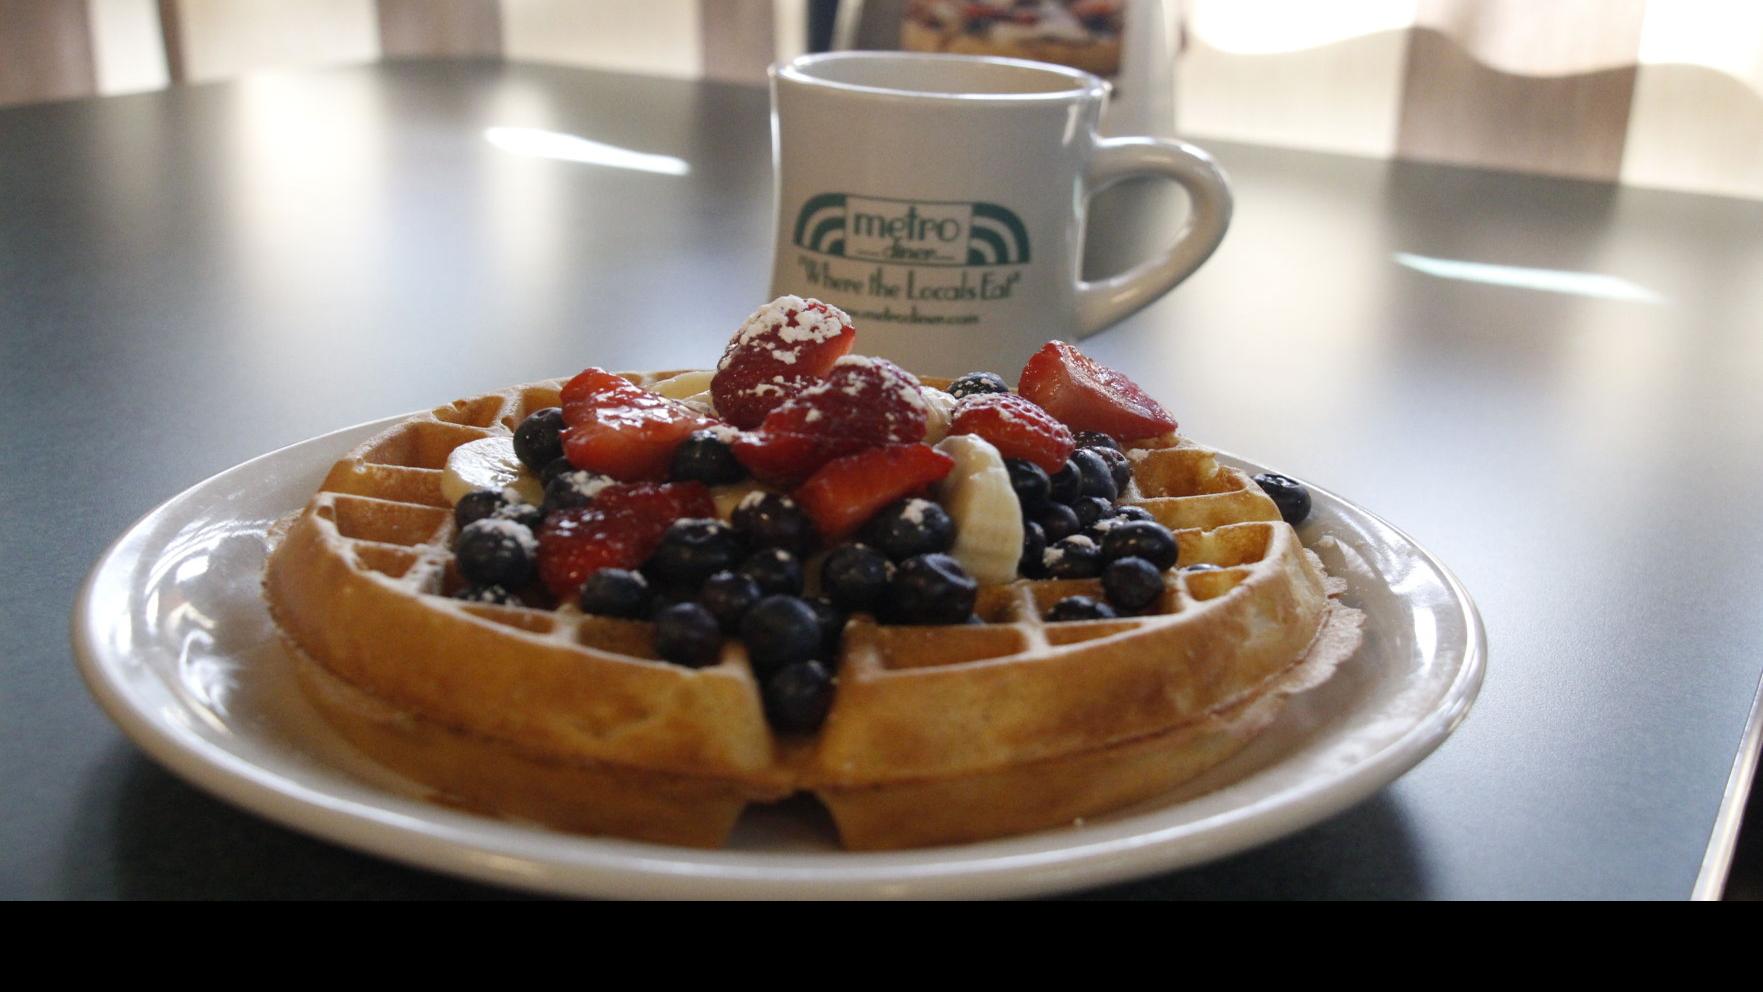 Waffles with blueberries, strawberries and bananas. ThEre is also a mug in the behind